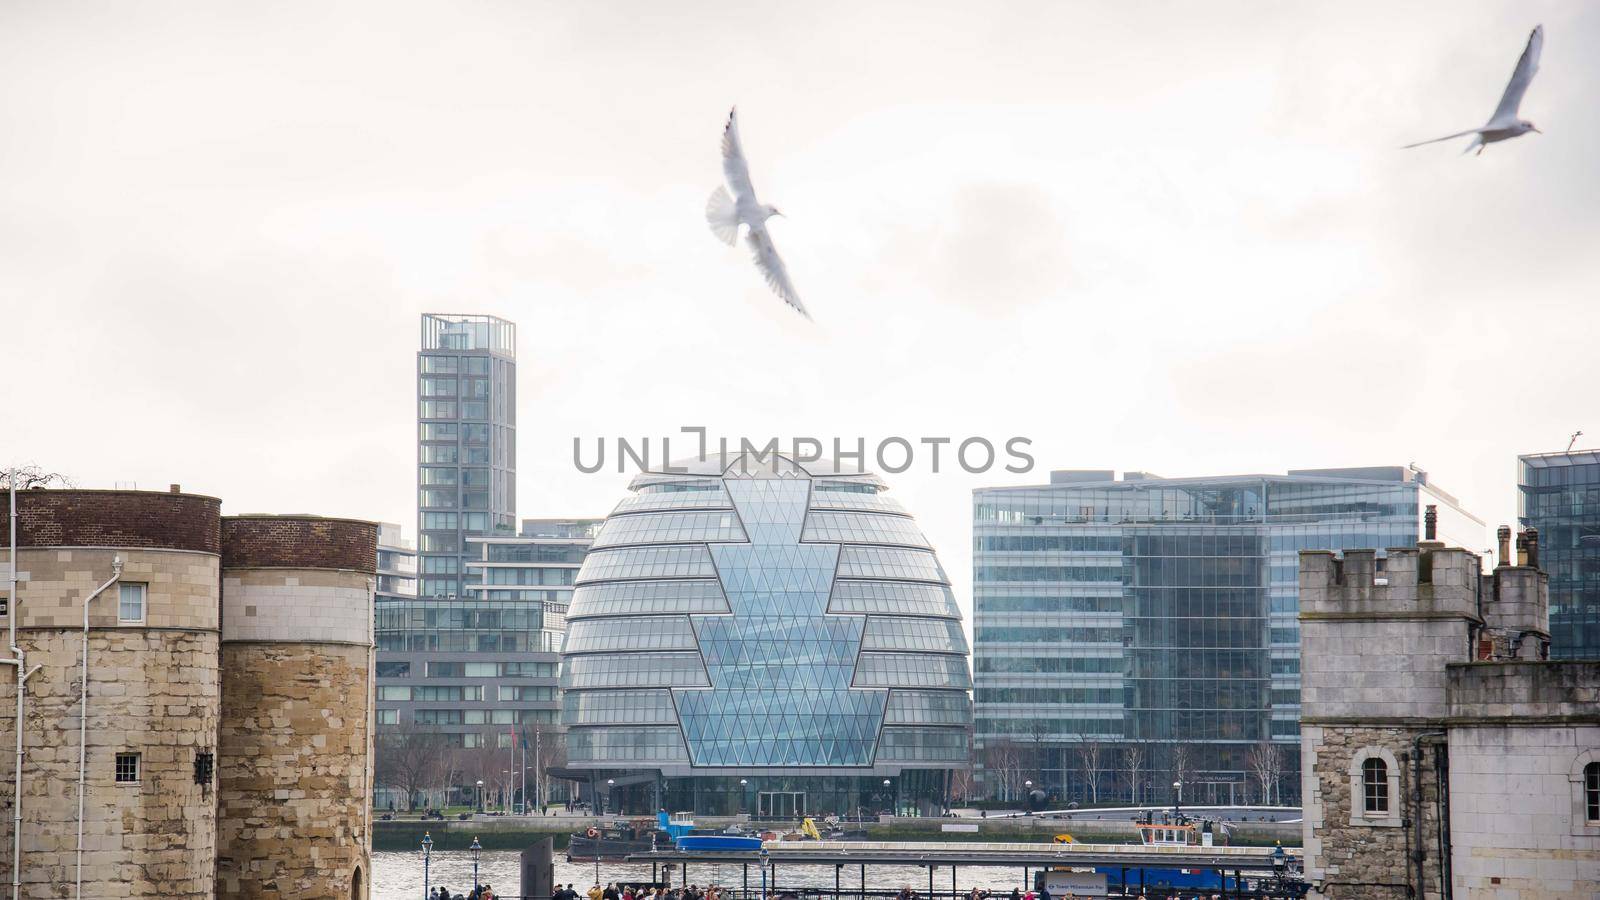 London, UK - January 27, 2017 : Unique view of City Hall in London with birds flying in the foreground.